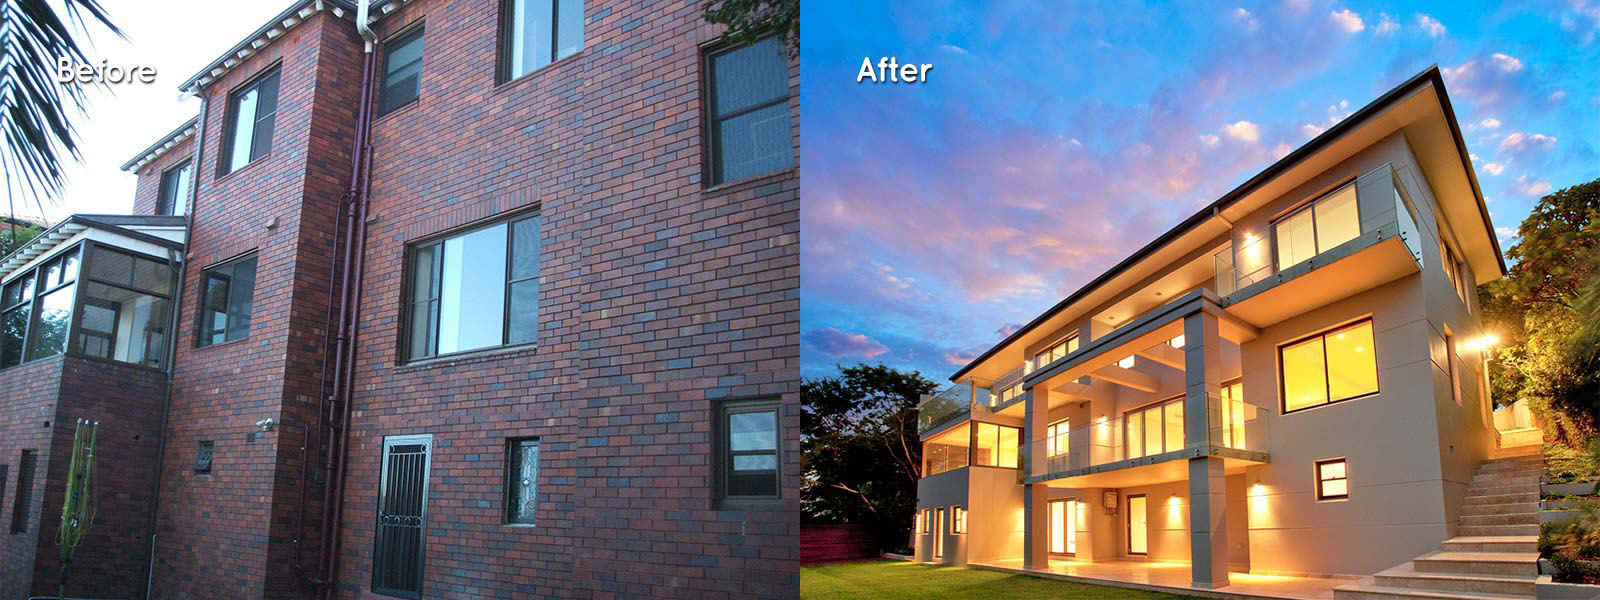 before-and-after-home-renovation-sydney-front